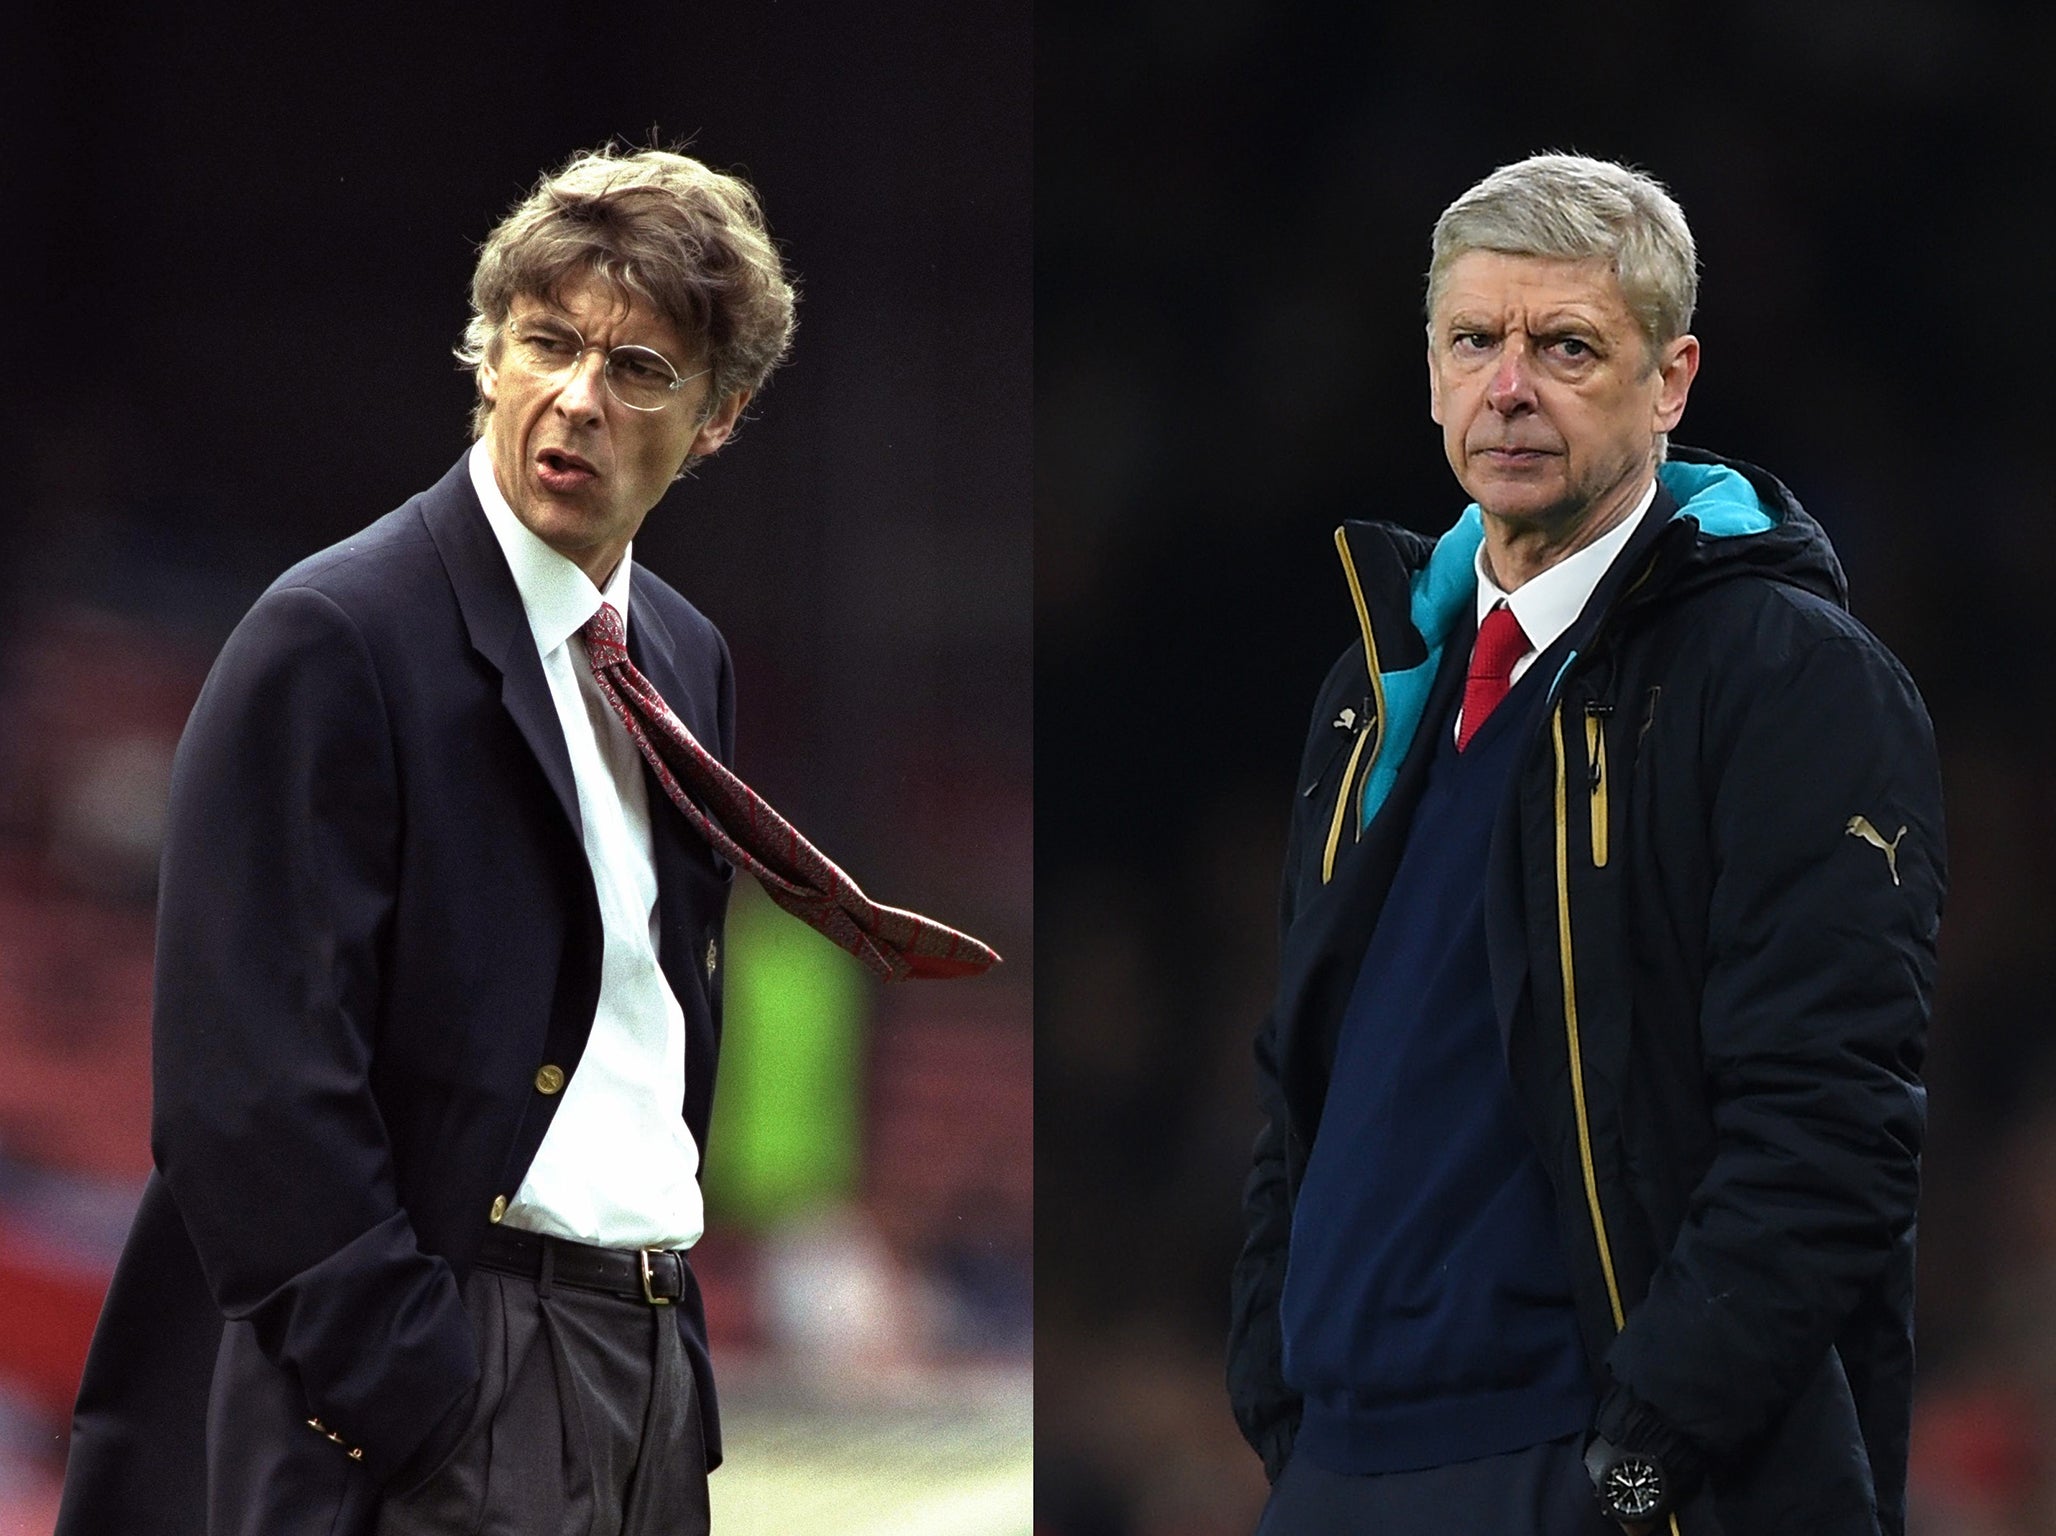 Arsenal manager Arsene Wenger still learning to adjust in a society where everyone knows more about everything